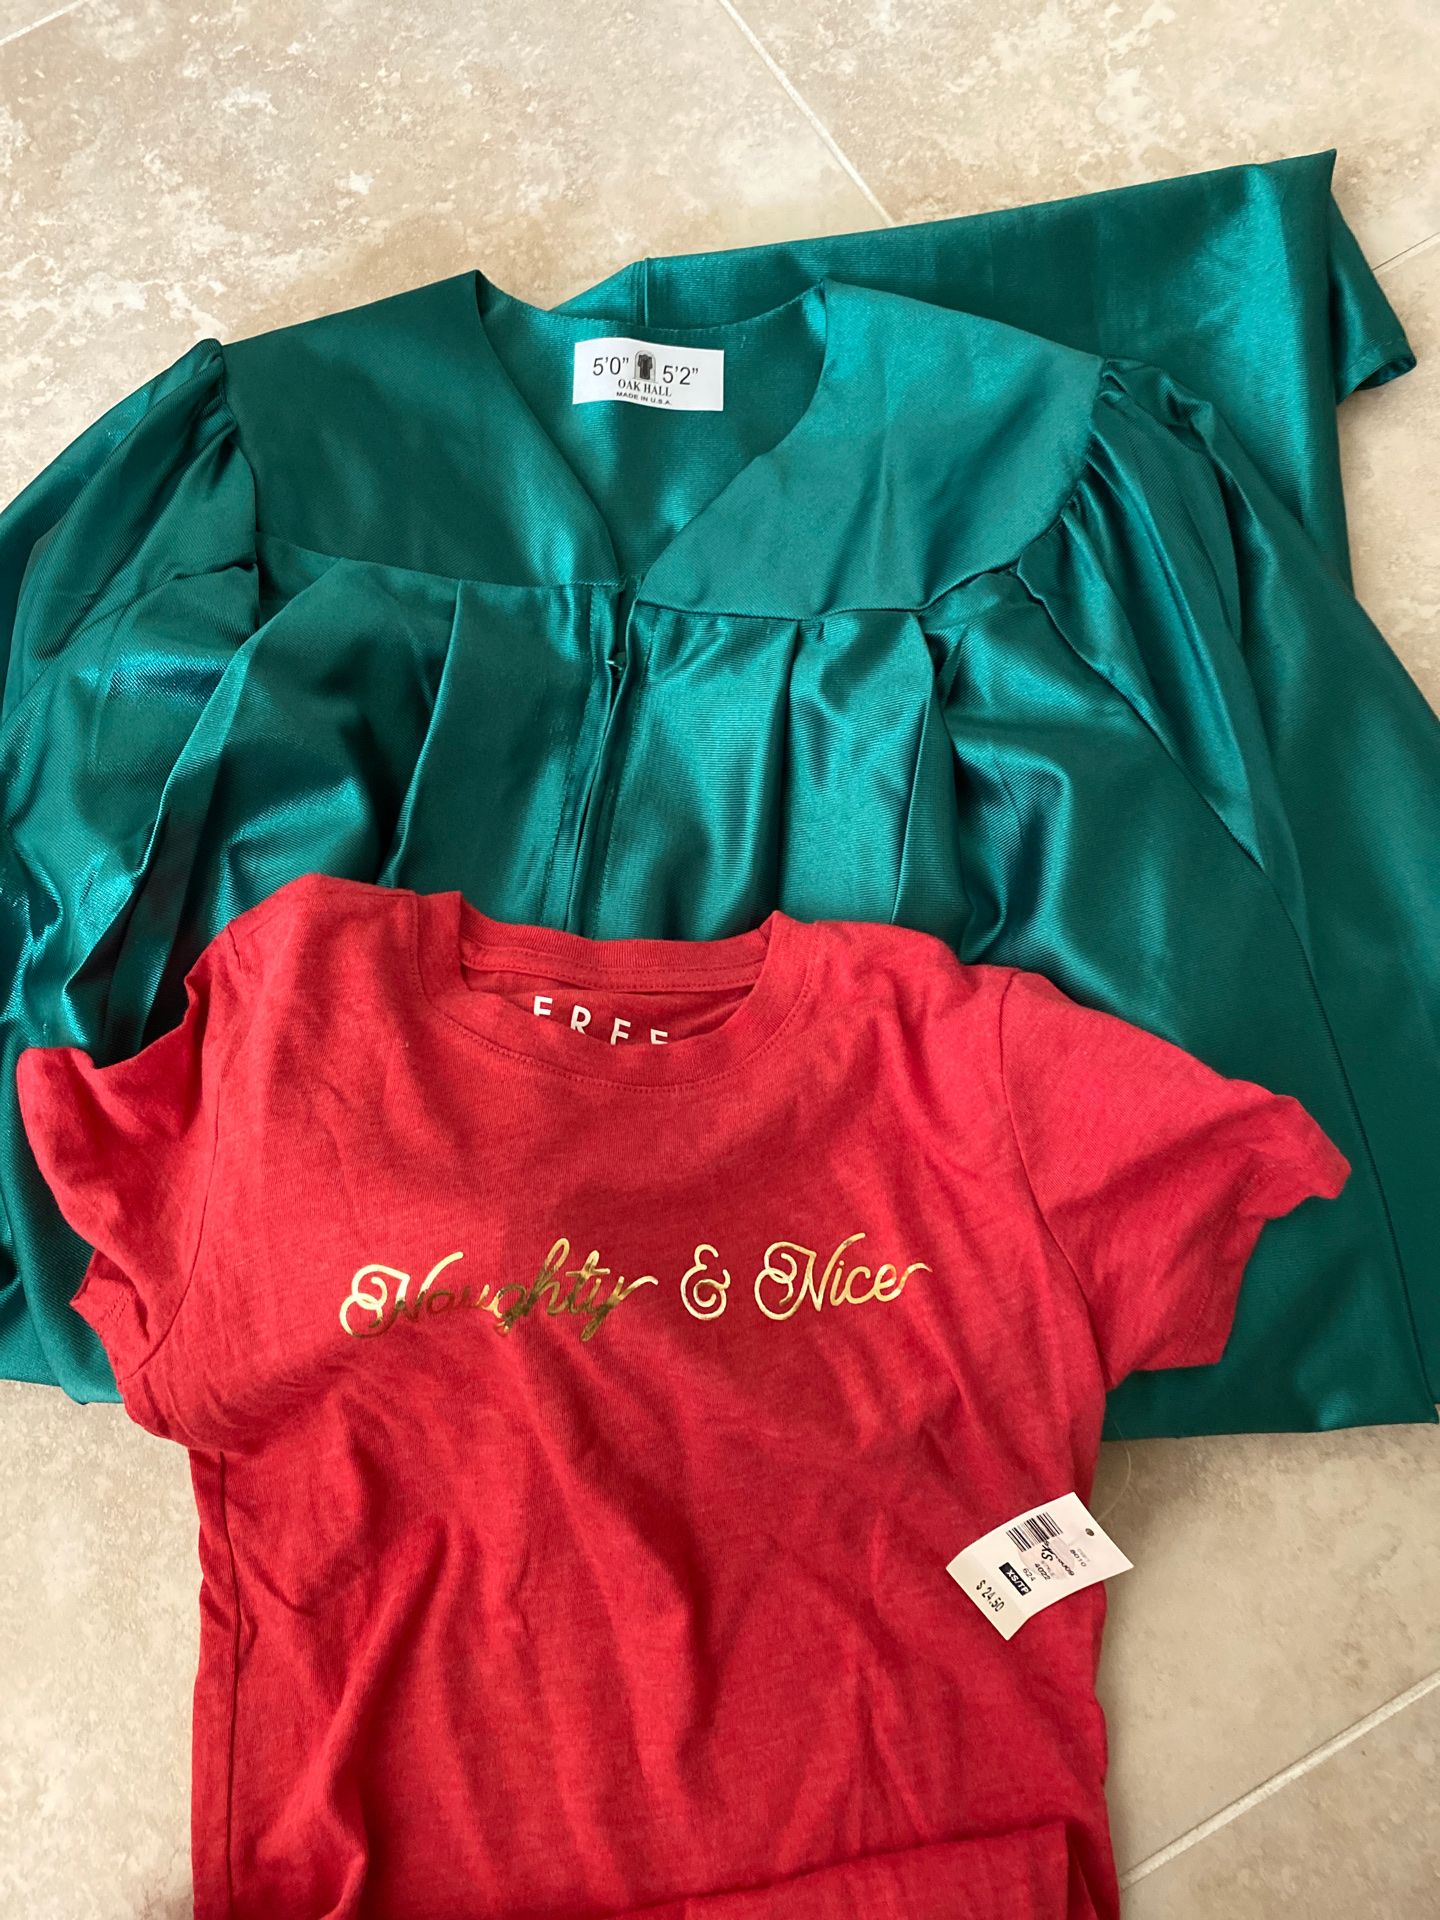 Graduation gown and tshirt for 5 dollars